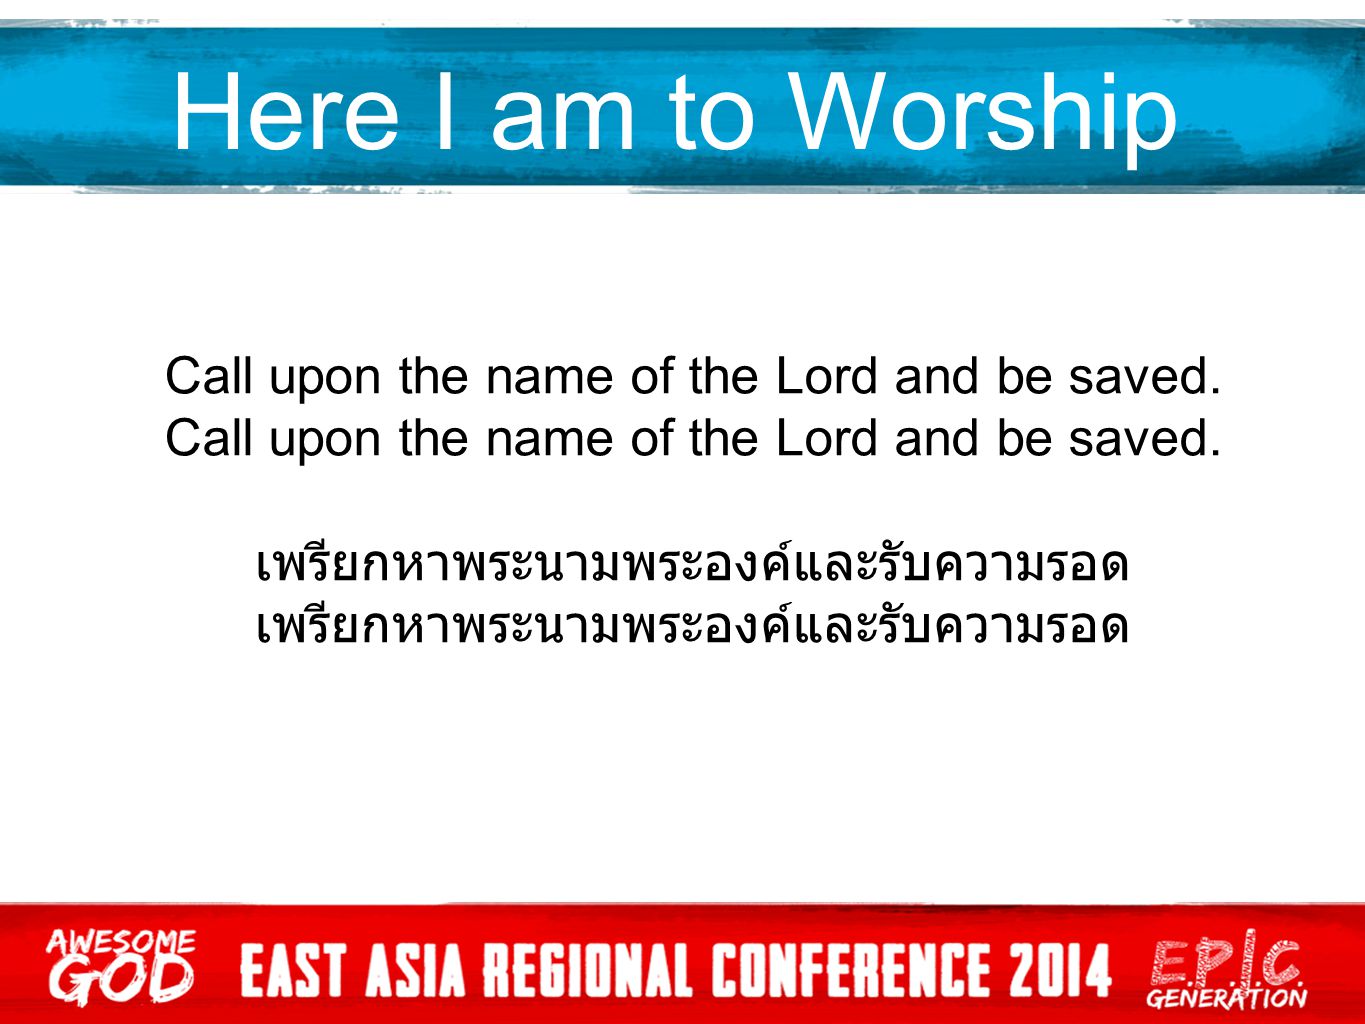 Here I am to Worship Call upon the name of the Lord and be saved.